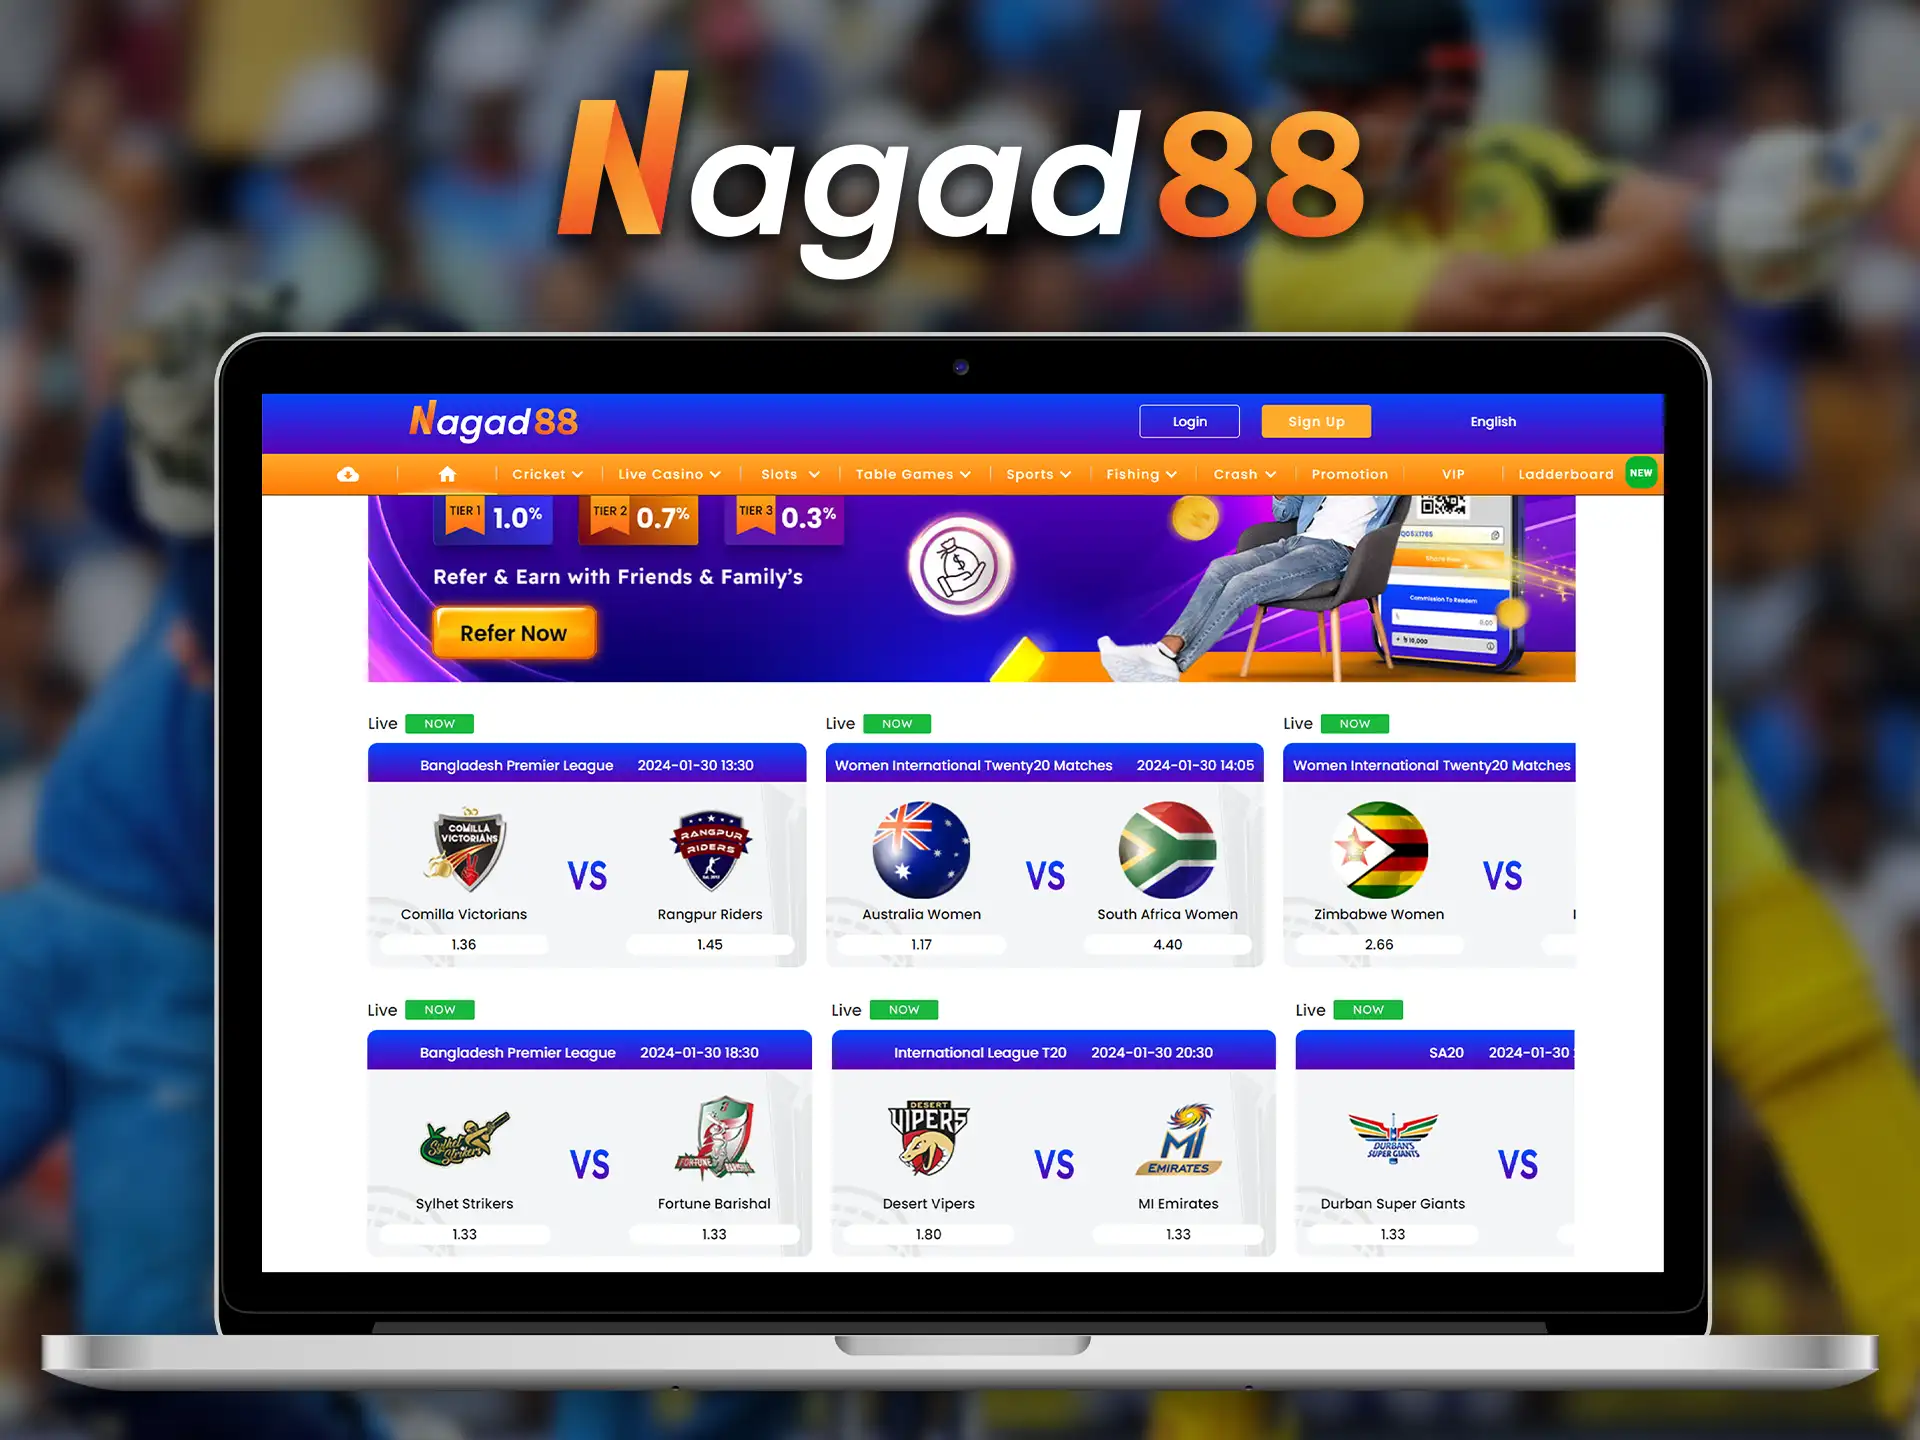 Nagad88 offers sports betting, casino and live streaming for Indian players.